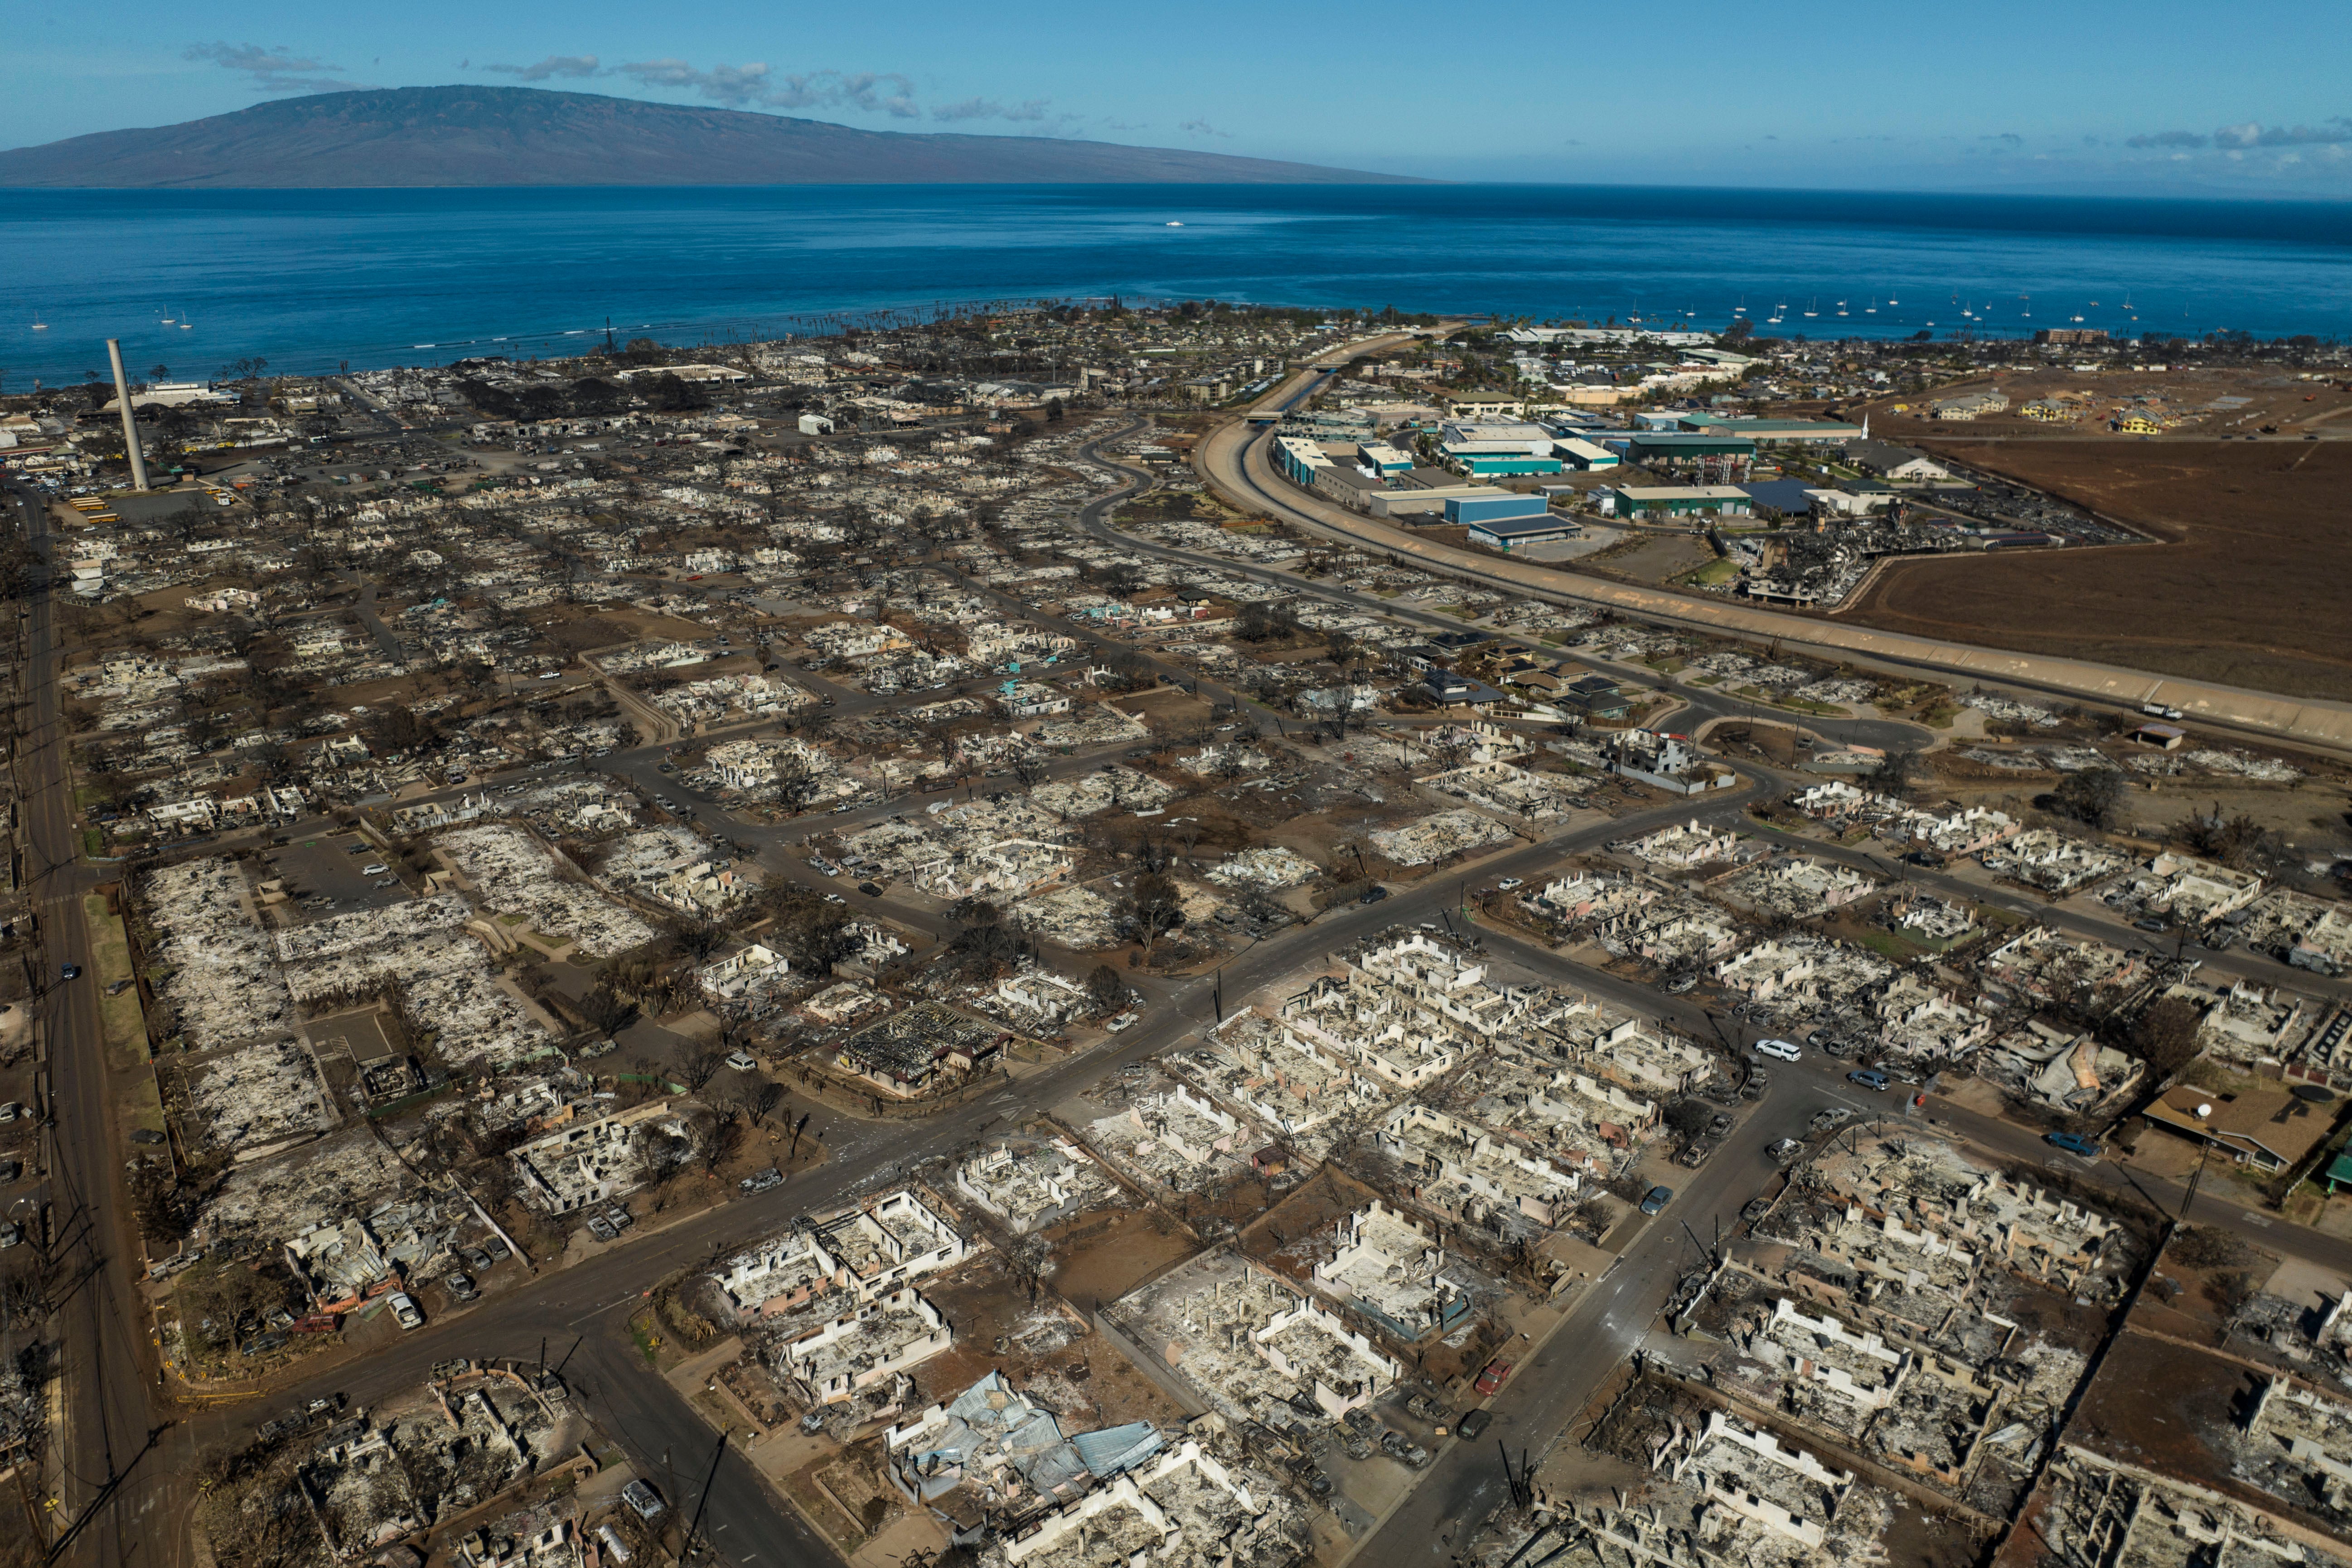 The aftermath of a wildfire is visible in Lahaina